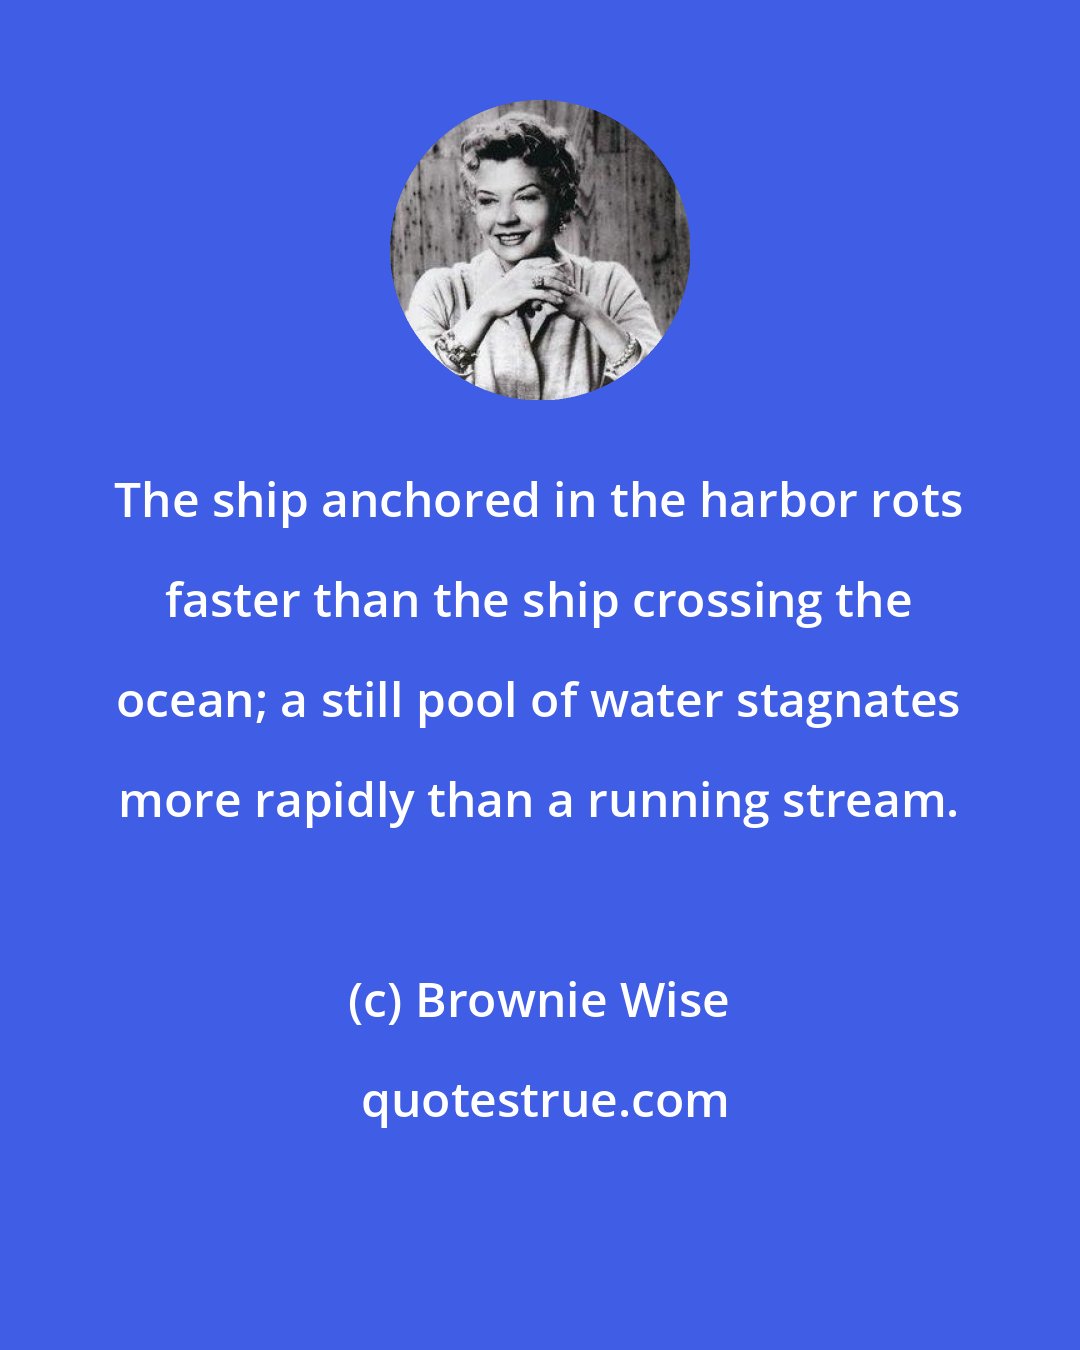 Brownie Wise: The ship anchored in the harbor rots faster than the ship crossing the ocean; a still pool of water stagnates more rapidly than a running stream.